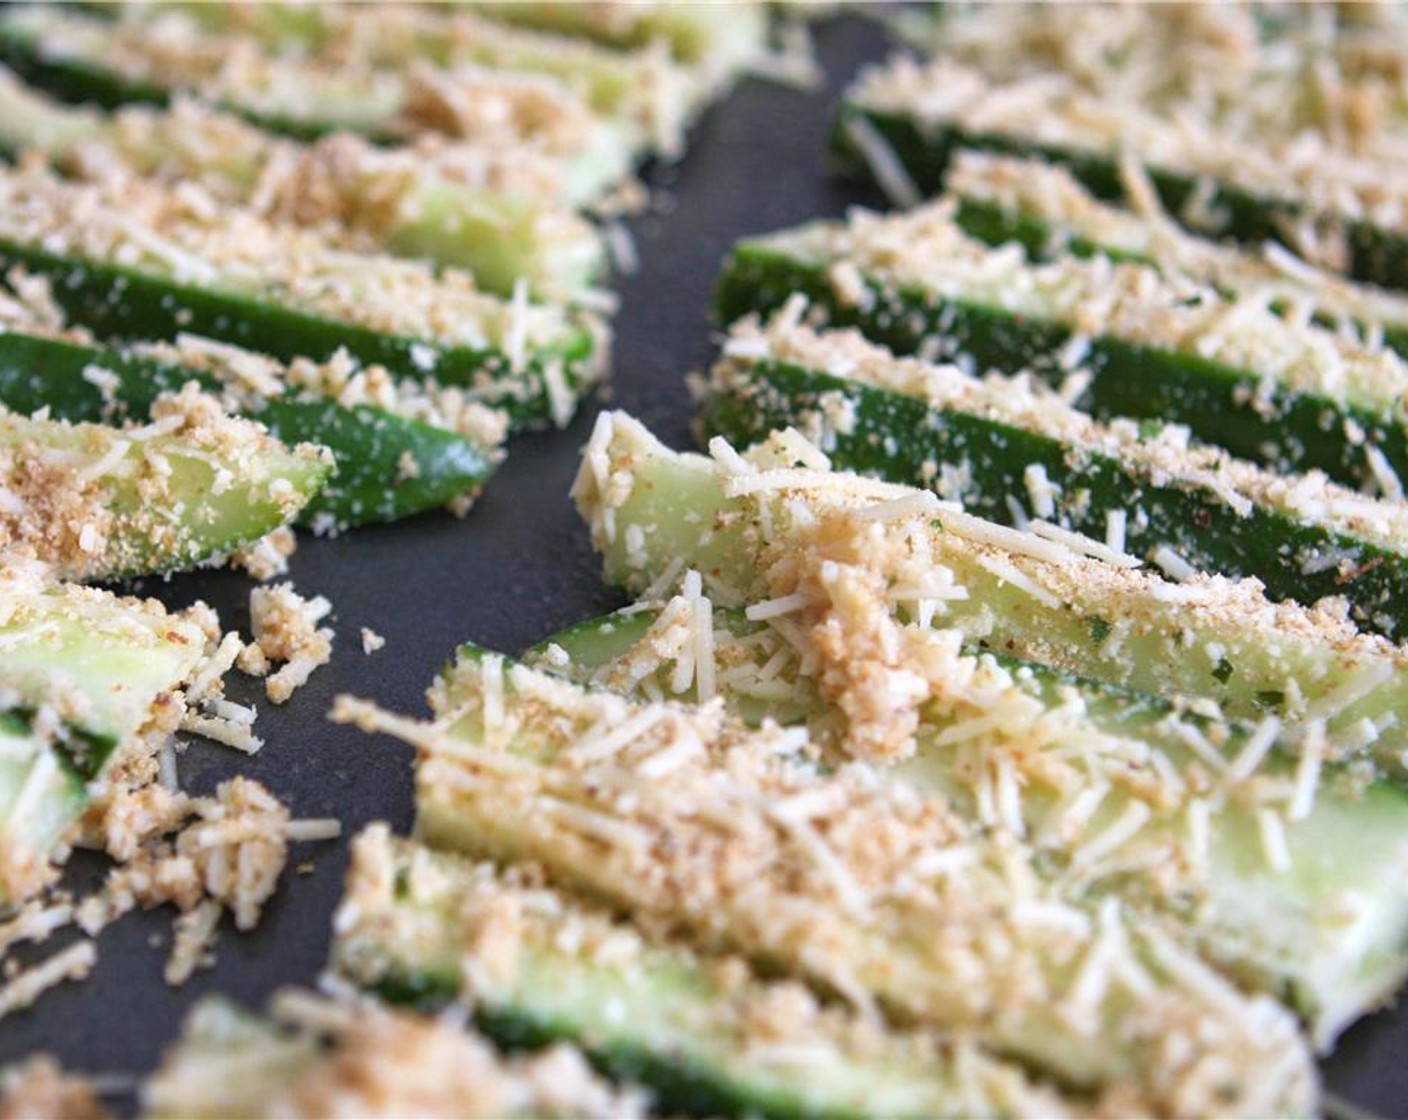 step 6 Place the coated zucchini strips onto the prepared baking sheet. Bake in the preheated oven for 20 to 25 minutes, or until crispy and golden brown.